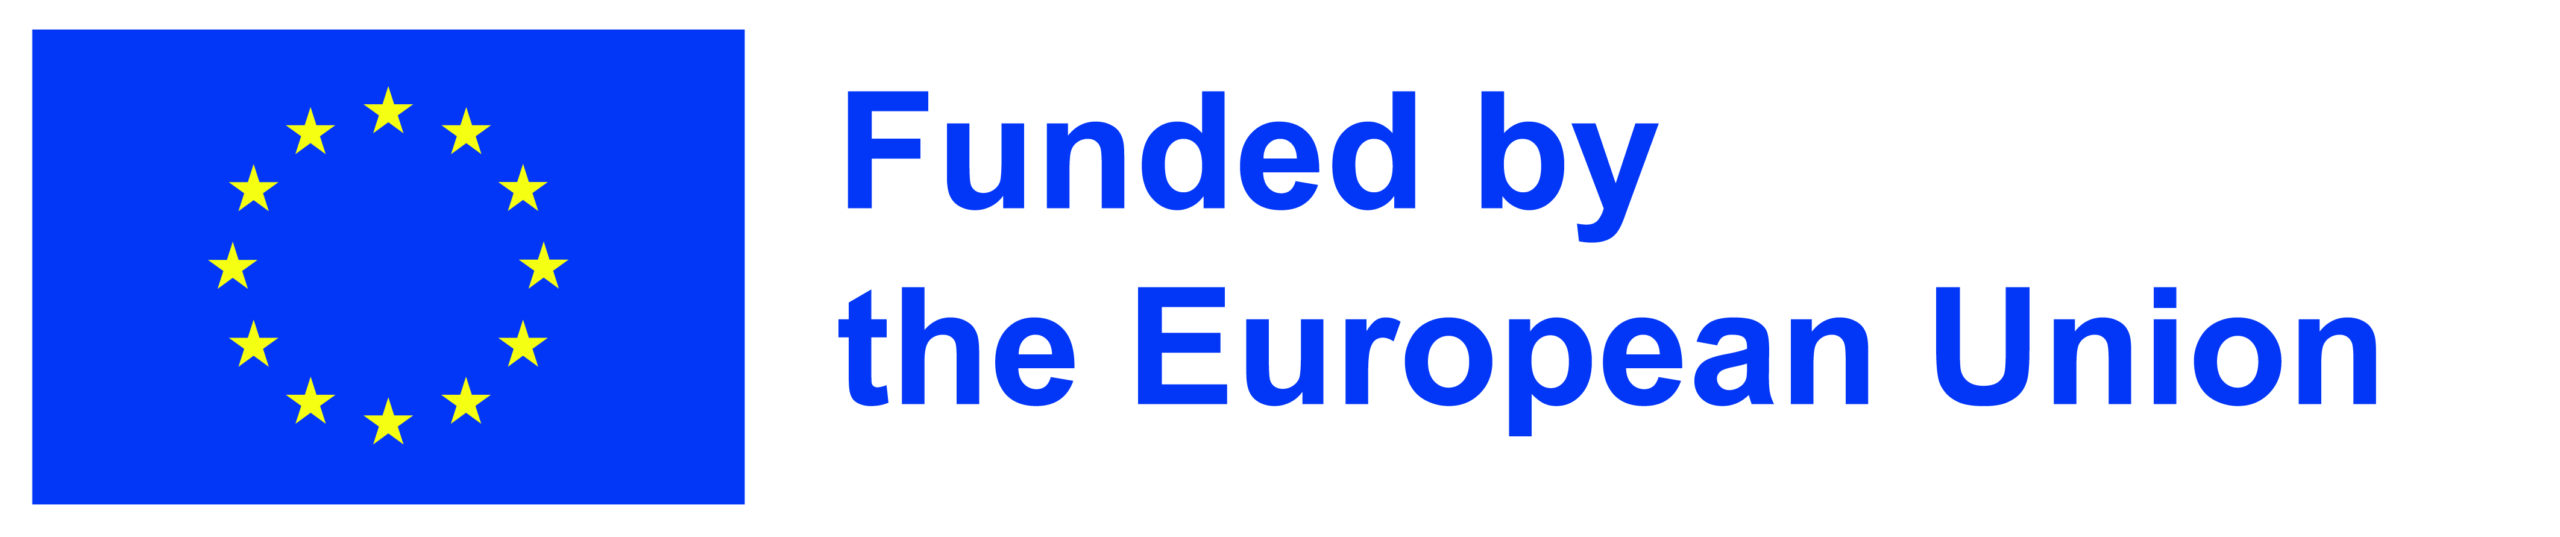 This project has received funding from the European Union’s Horizon Europe research and innovation funding programme under Grant Agreement No 101057988. Subvención total: 5.754.846,25 euros Subvención para ITENE: 449.843 euros